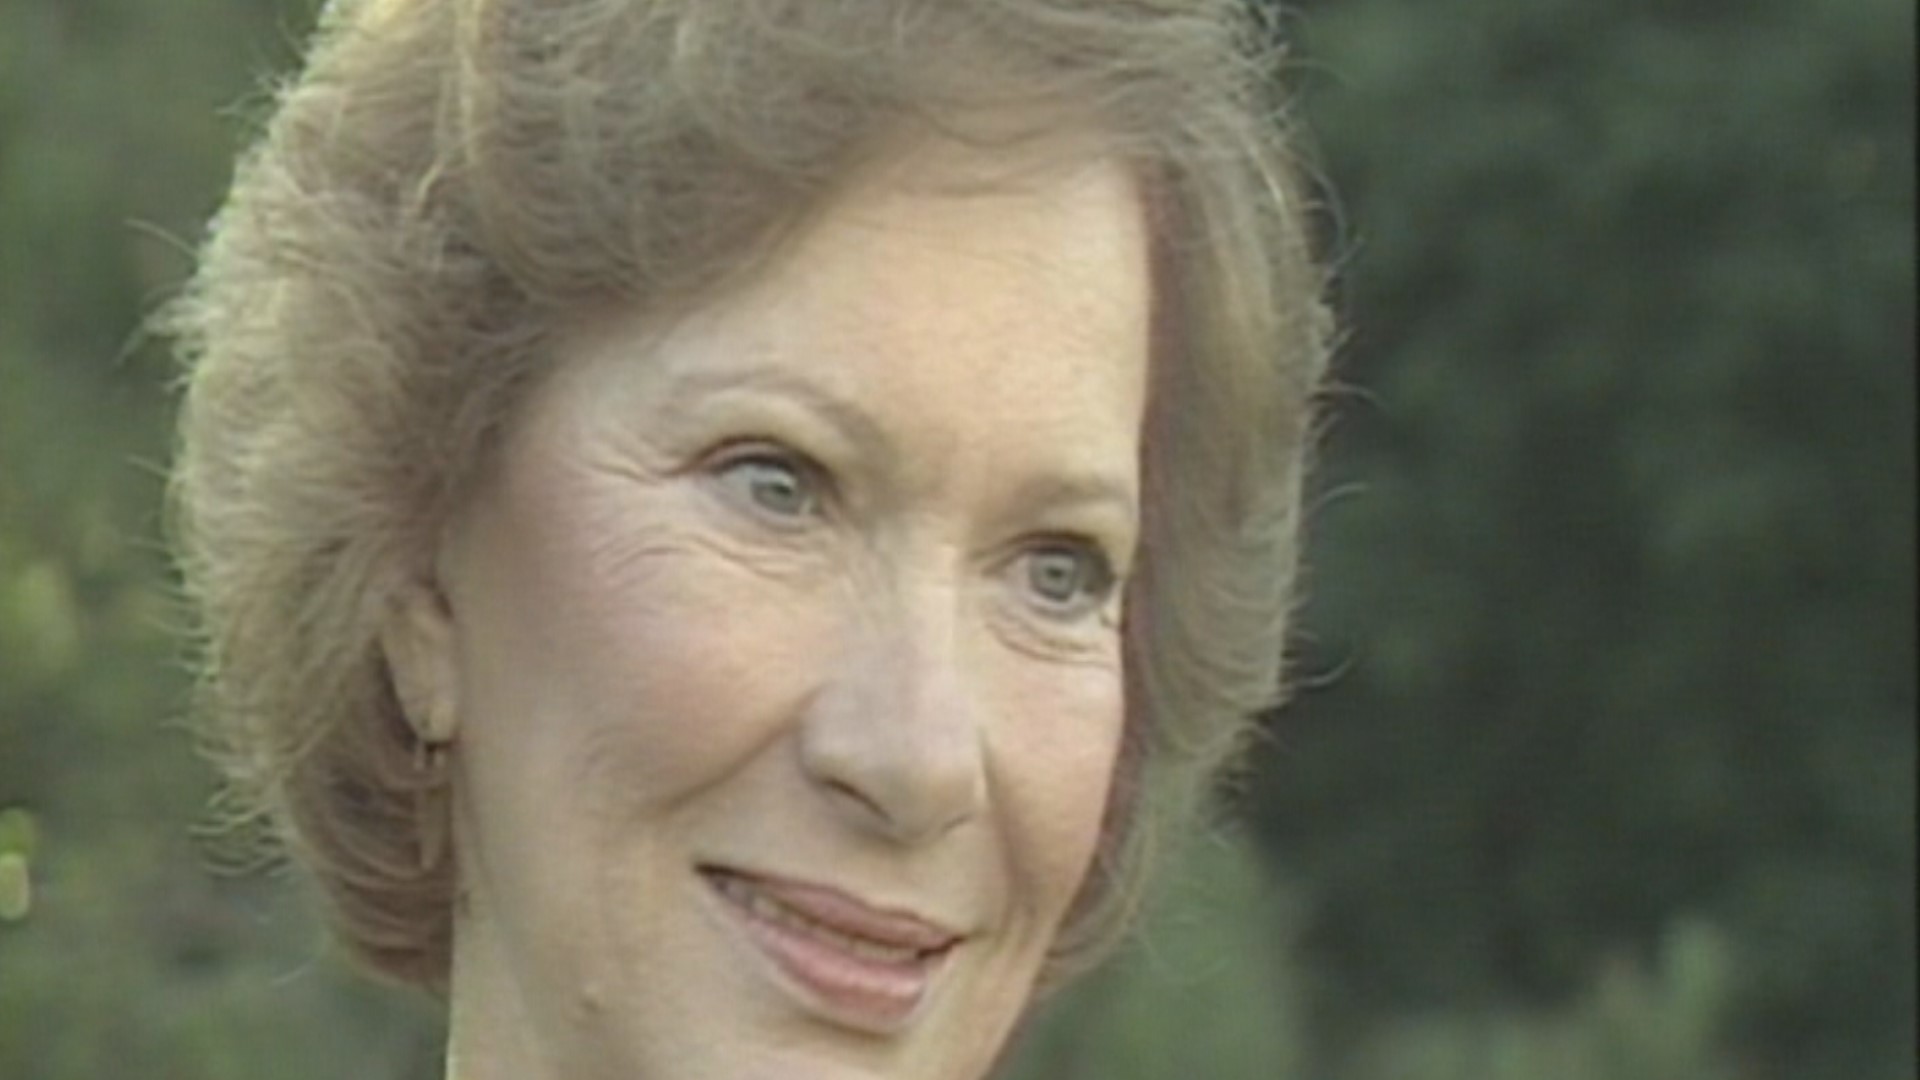 Tributes are pouring in for former First Lady Rosalynn Carter, including here in Minnesota.